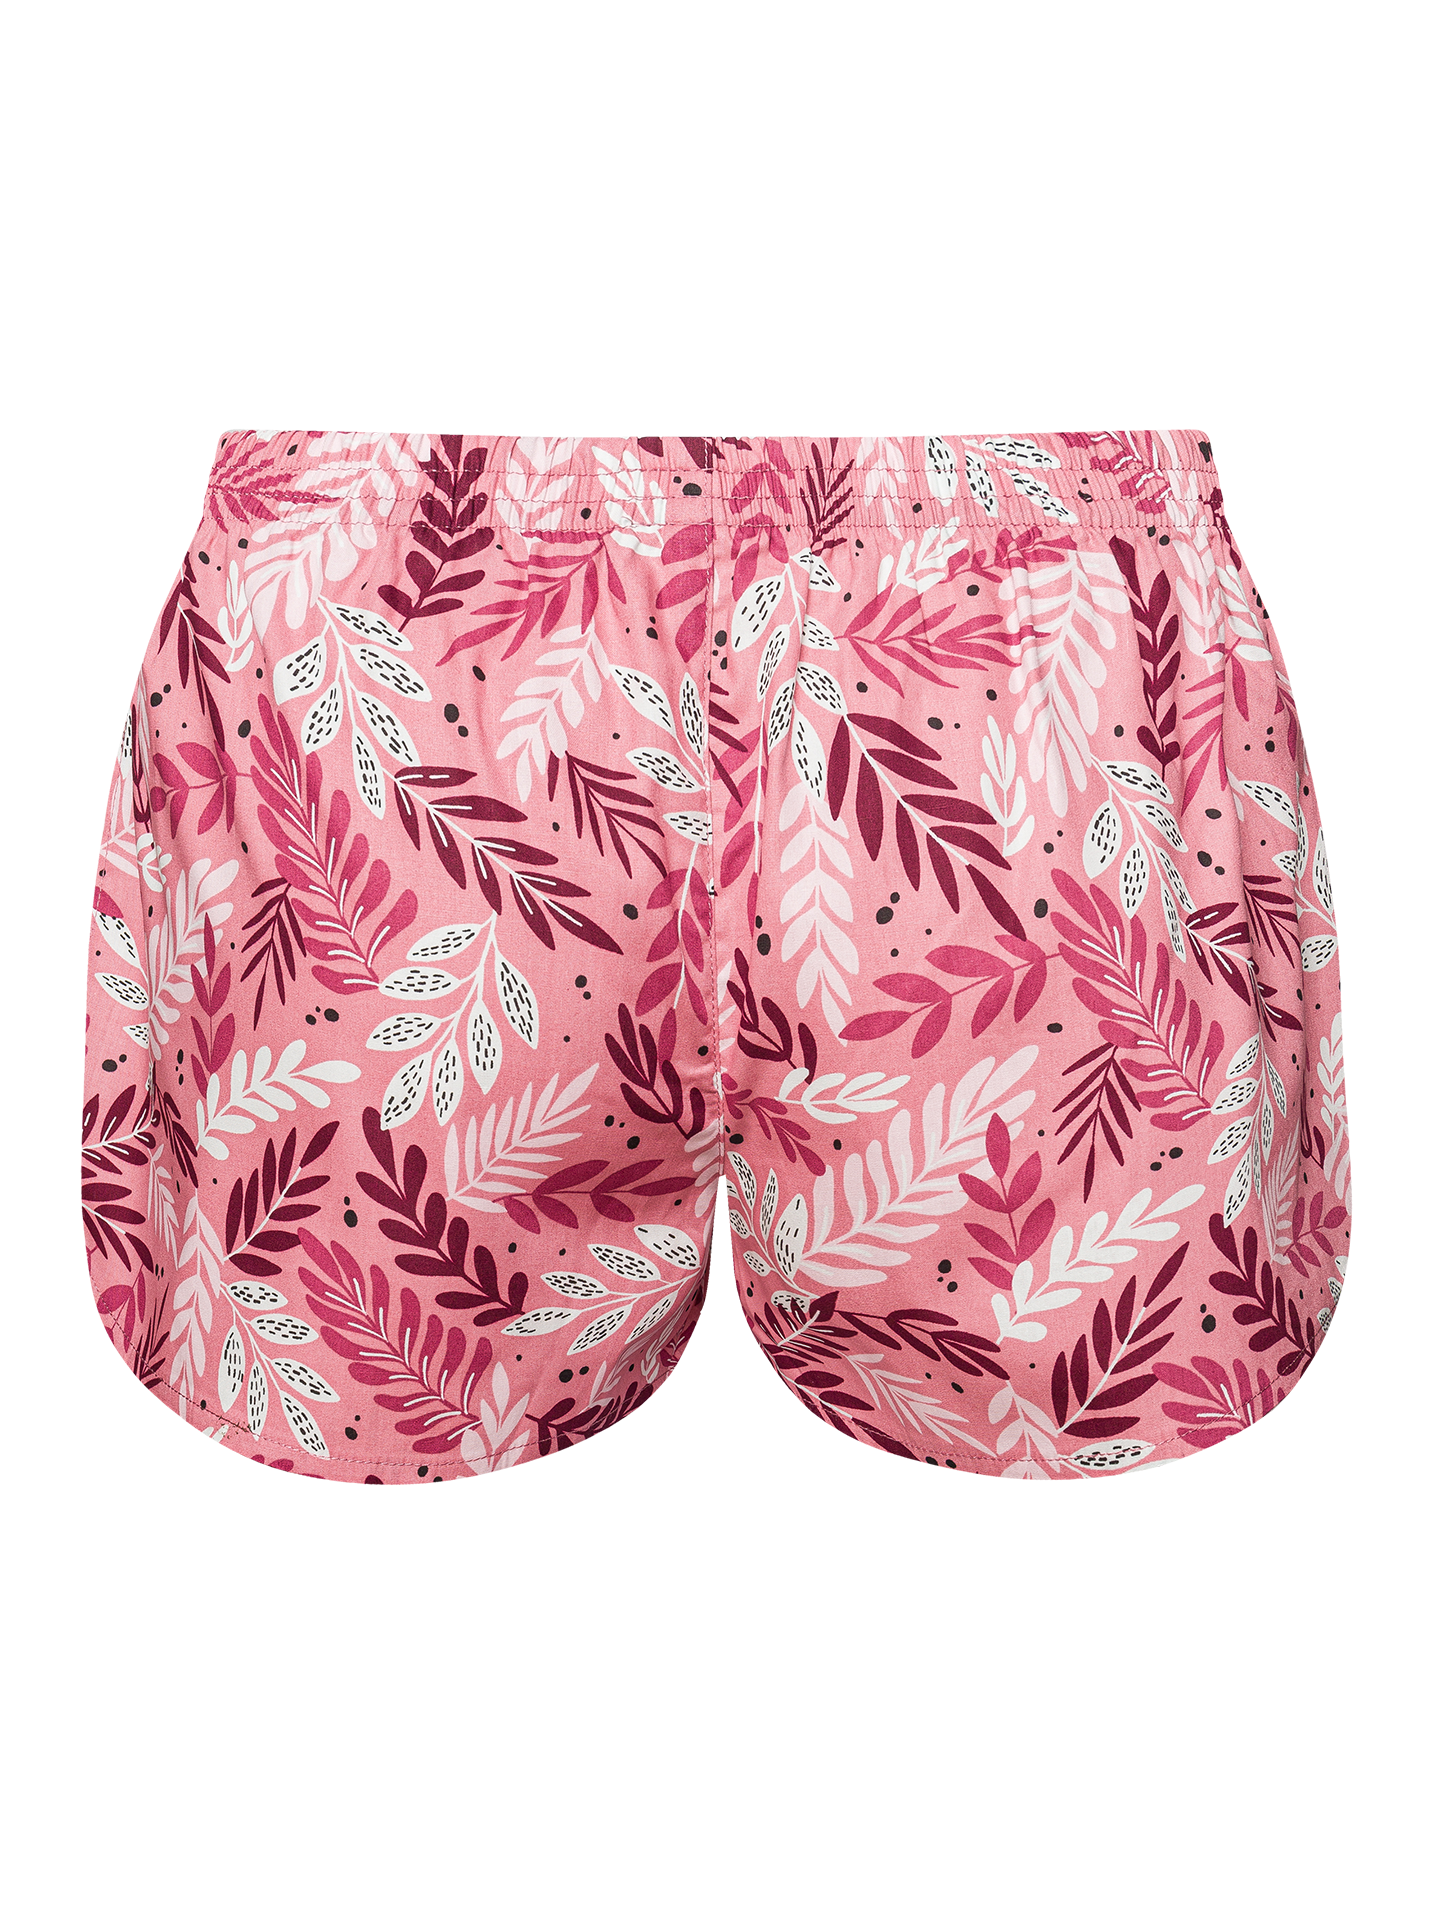 Women's Boxer Shorts Pink Leaves